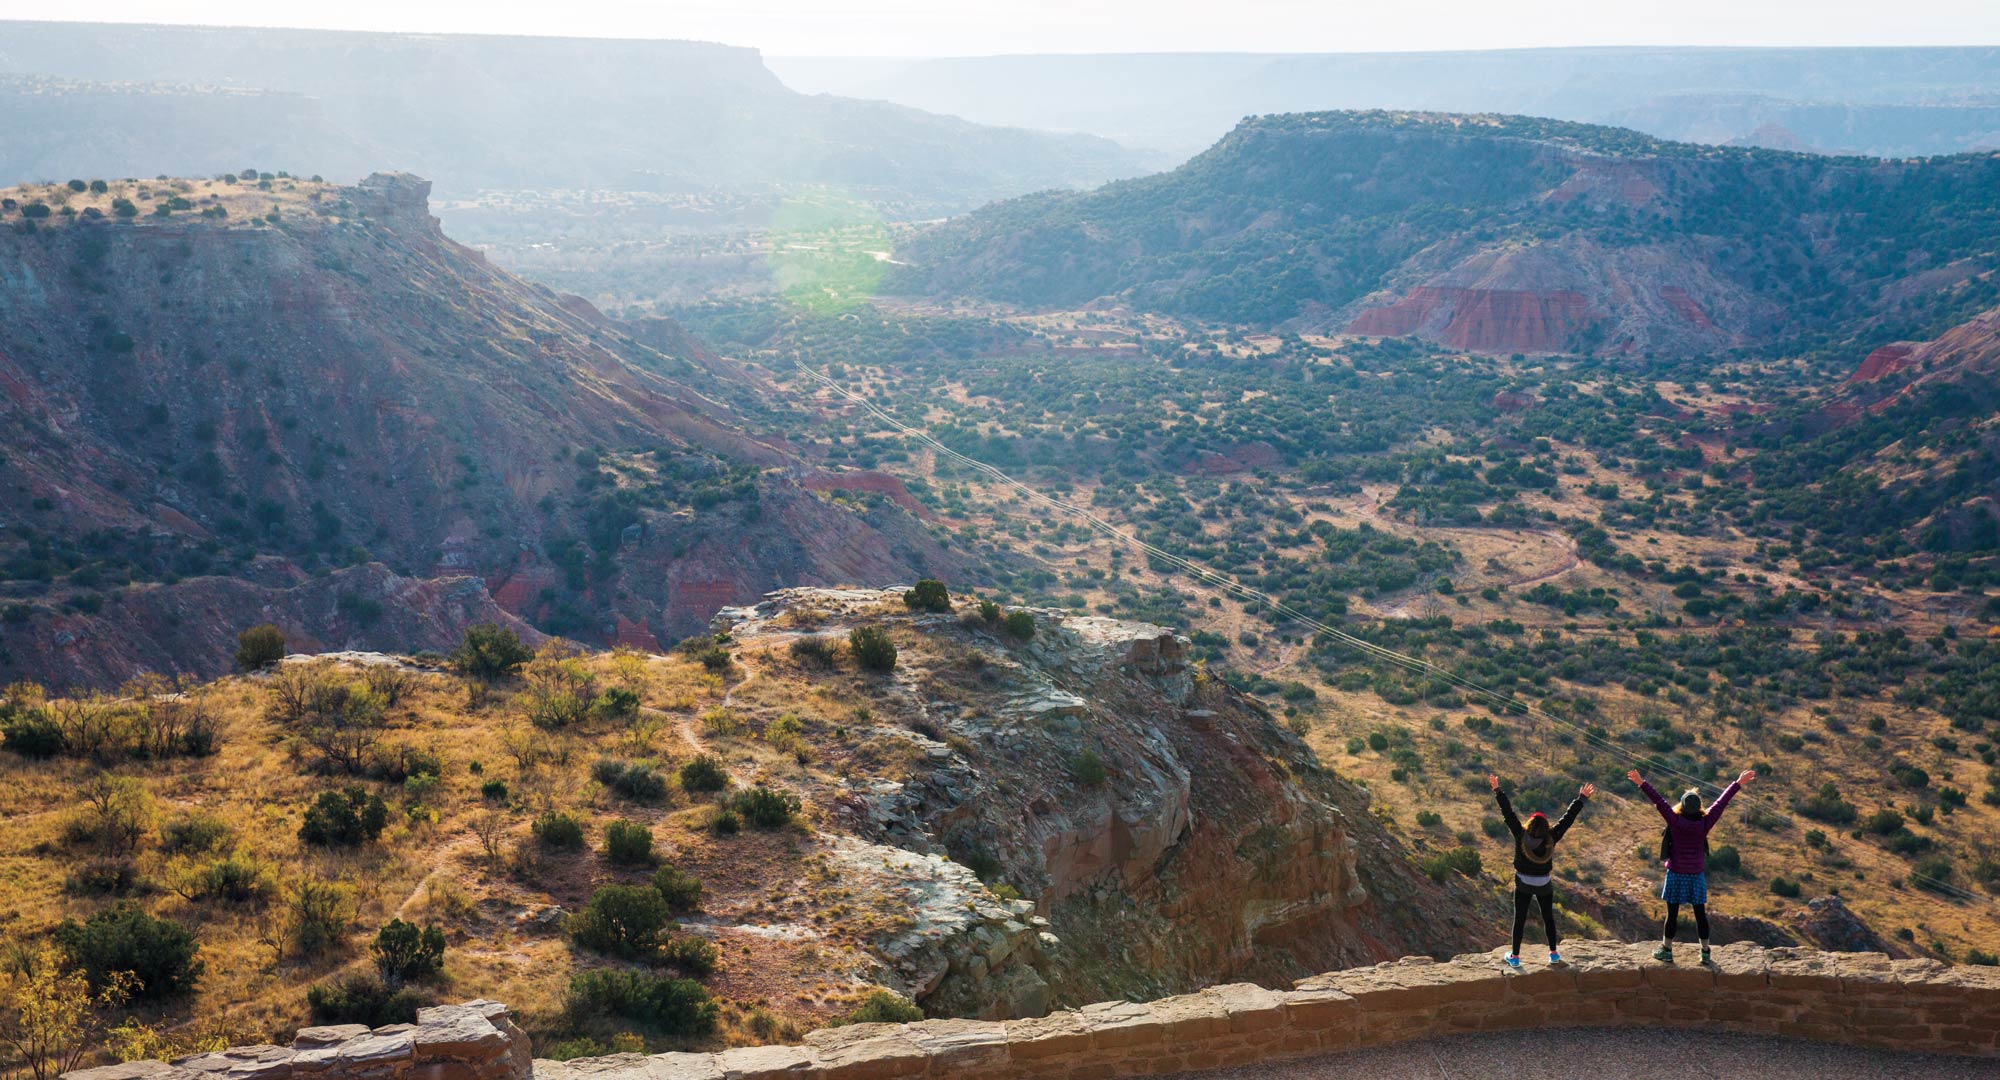 Looking into Palo Duro Canyon